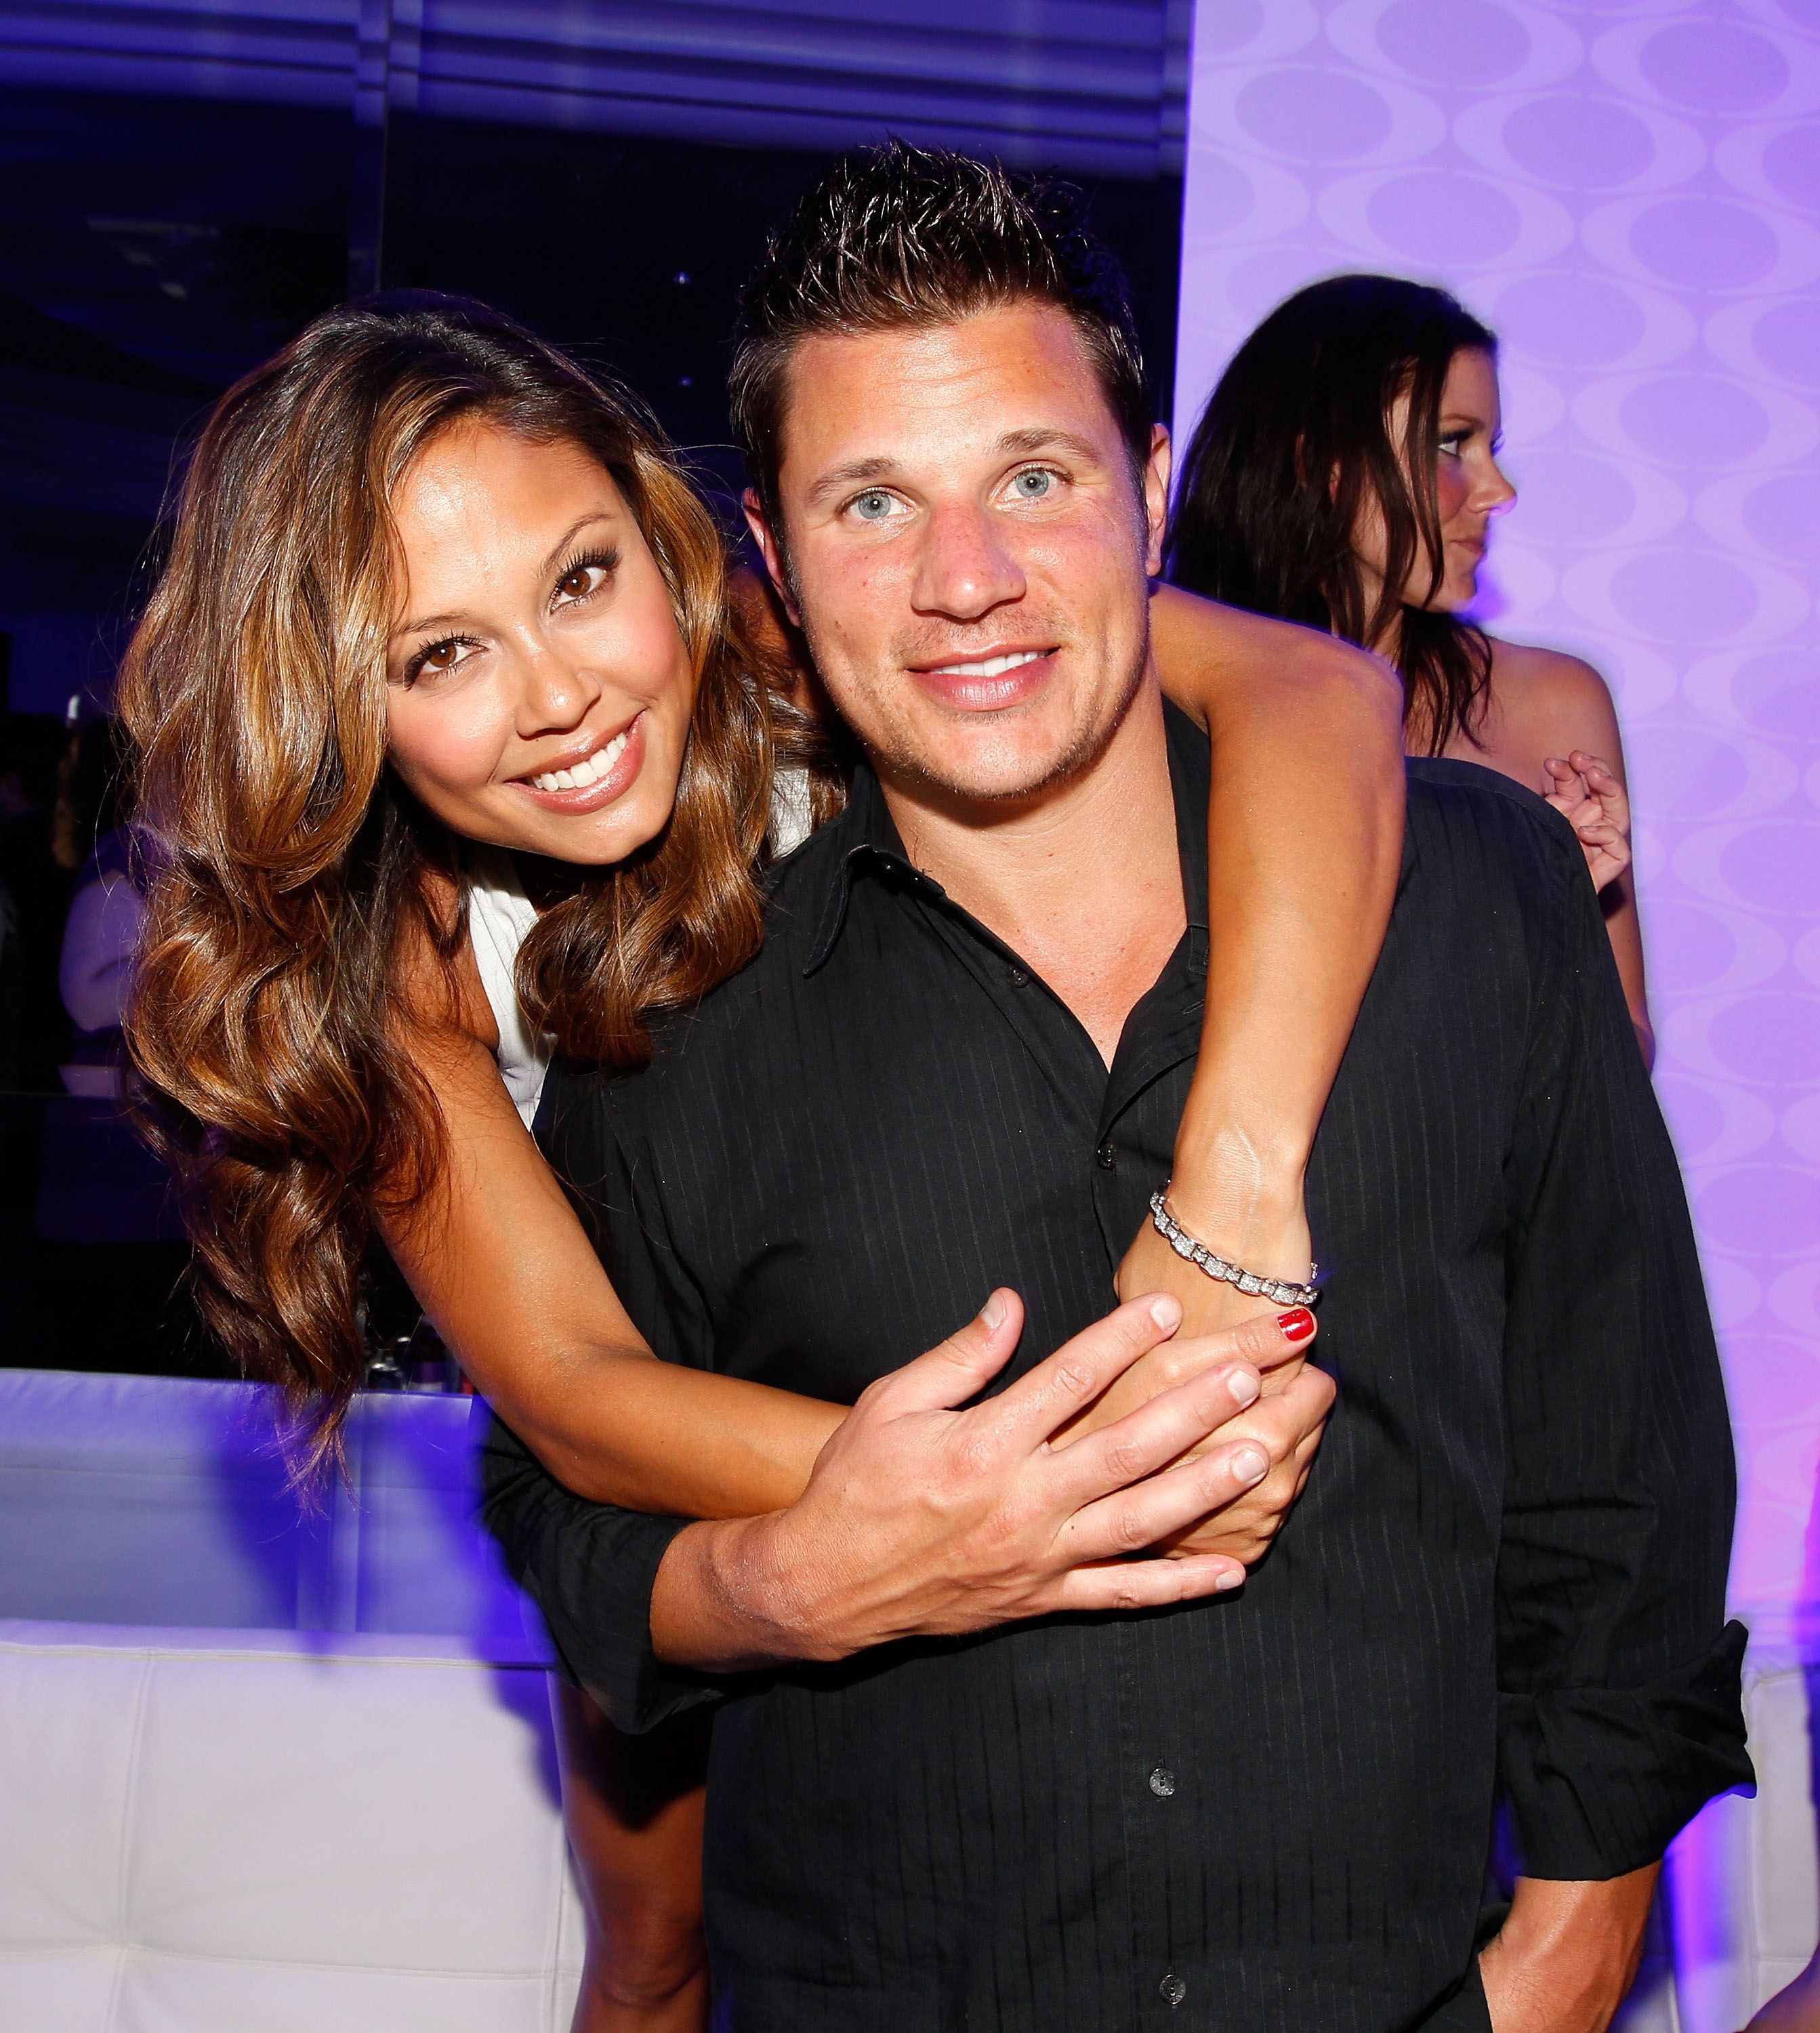 Where Does Nick Lachey Live? Details on His Homes From Hawaii to